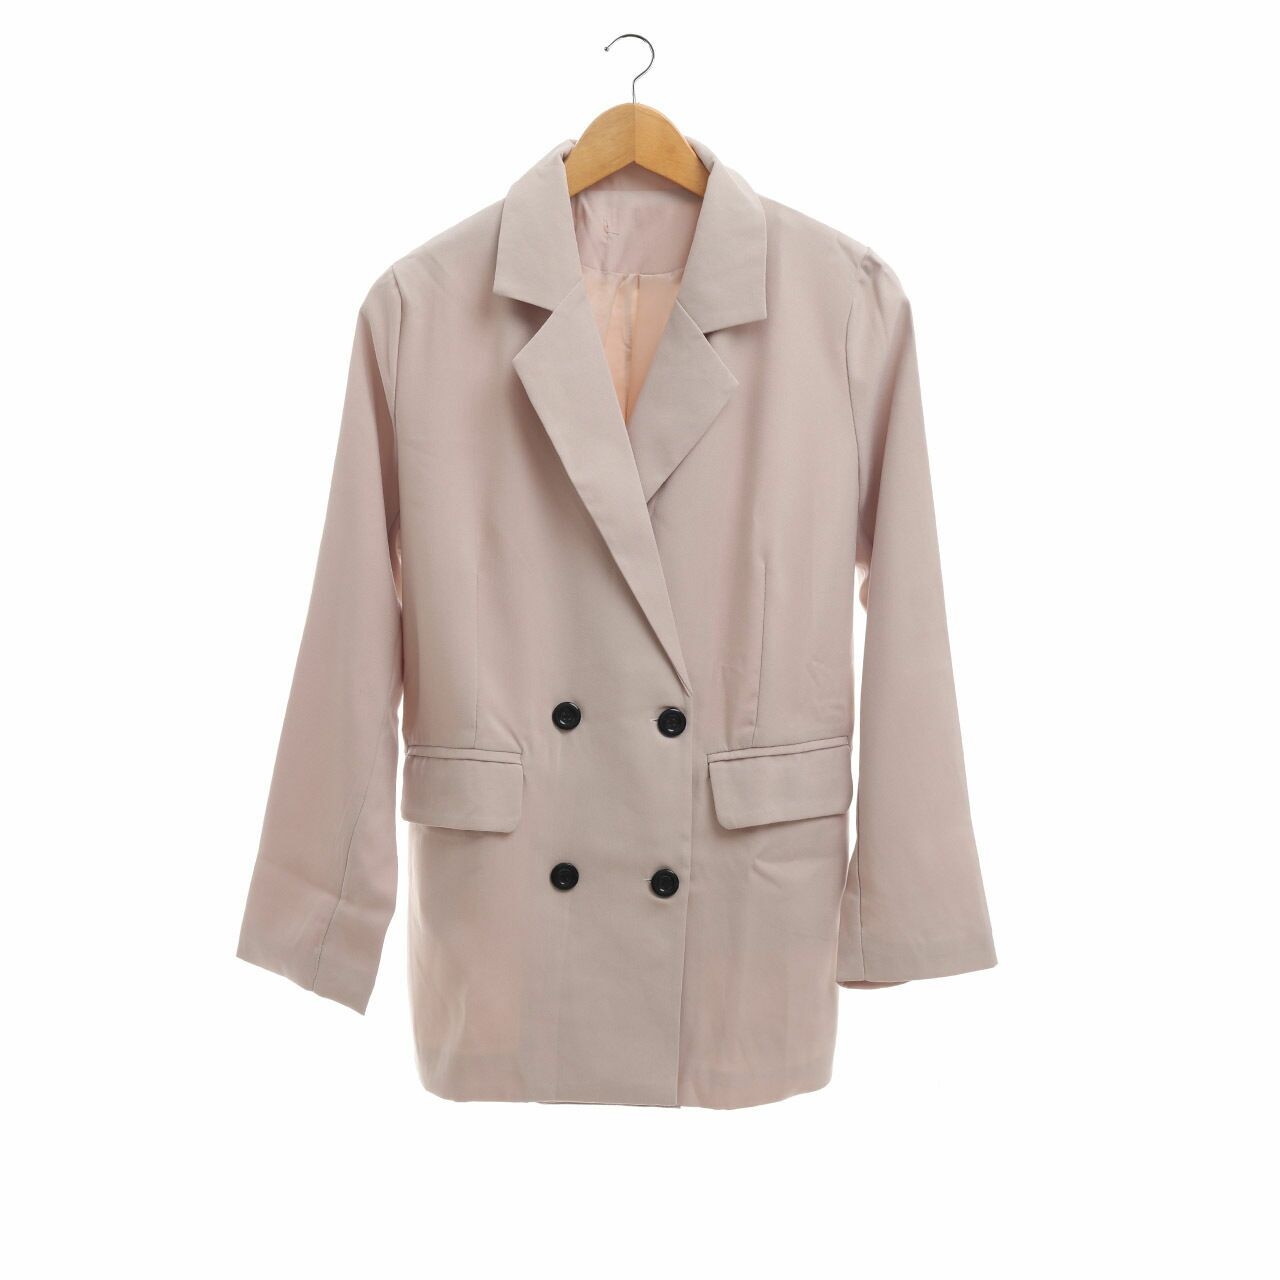 Day by Love and Flair Nude Blazer